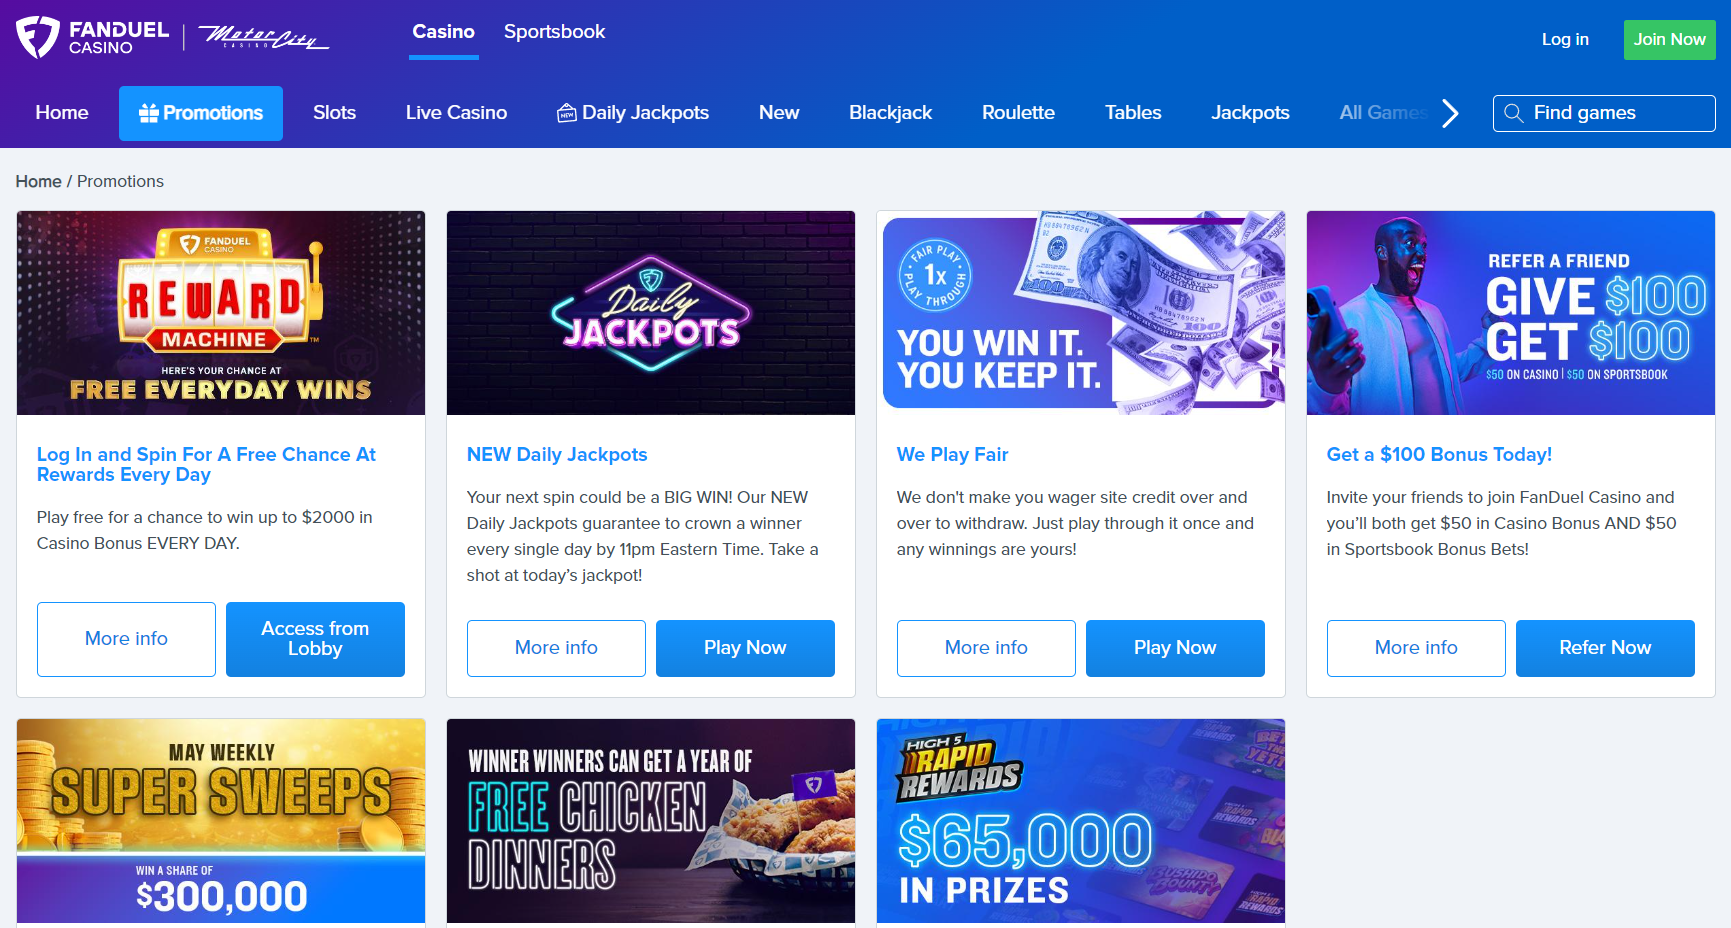 The Excitement Never Ends With So Many Fantastic FanDuel Promotions Available Every Day